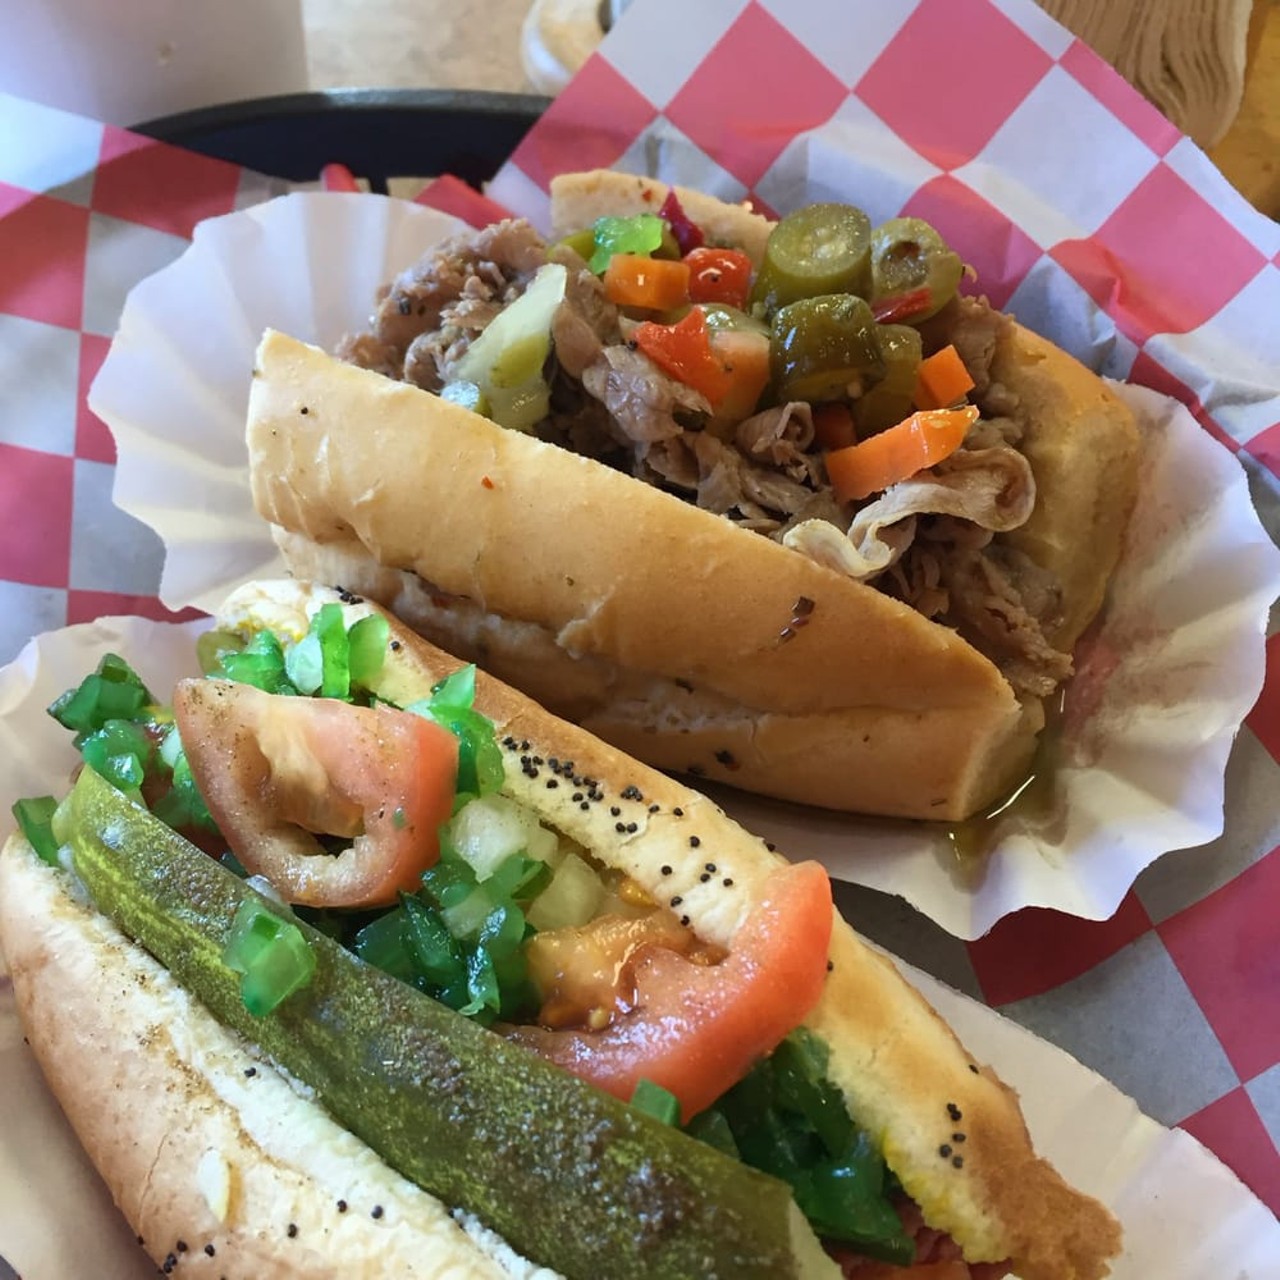 Chubby's Hot Dogs9400 Highway 17, MaitlandAnother Chicago-inspired spot to rock your socks off, Chubby’s is home to a variety of dogs and a variety of specialty condiments. They put it best on their menu: Why settle for a weenie when you can have a Chubby?
